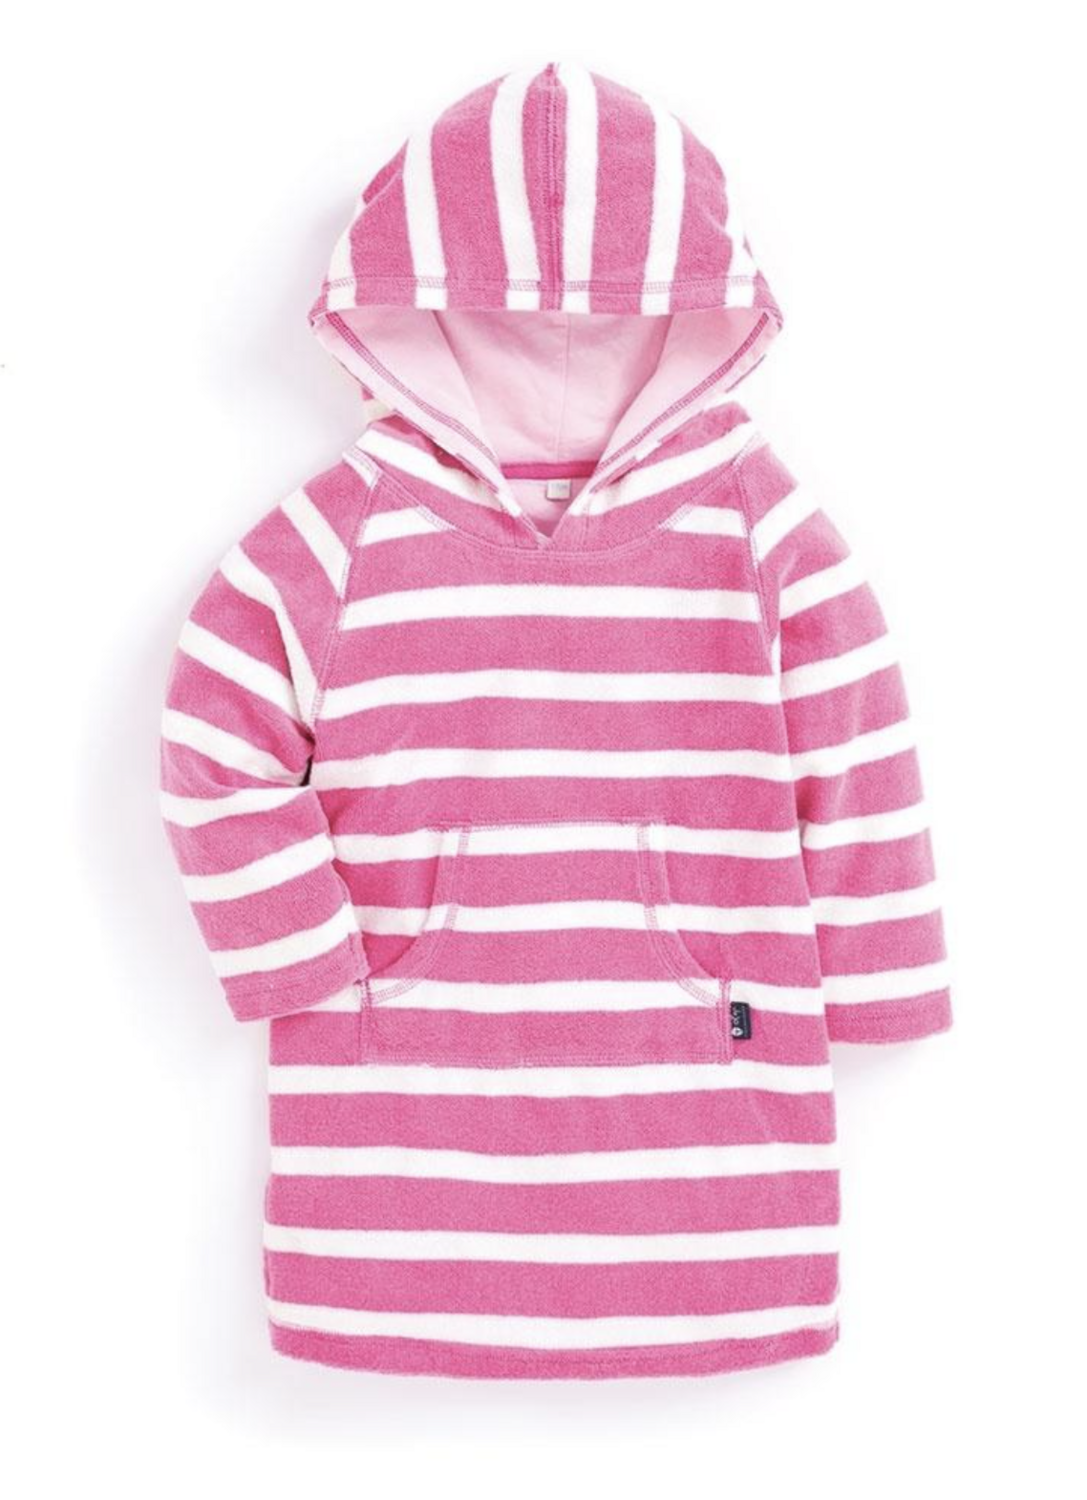 Stripe Towelling Pull On Orchid 12-24 mos.